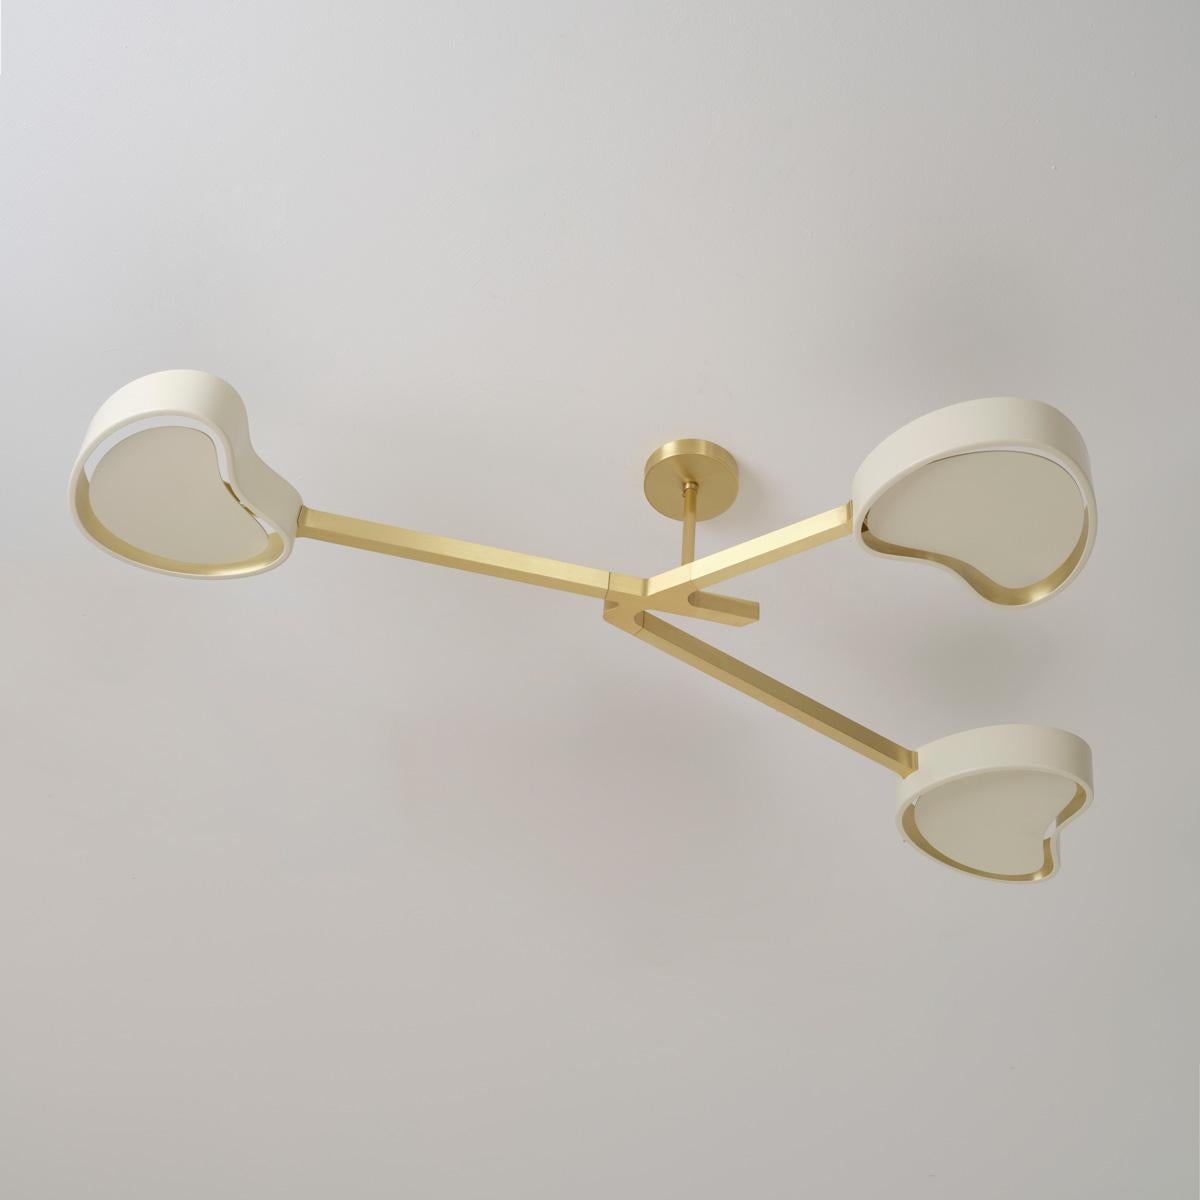 Italian Cuore N.3 Ceiling Light by Gaspare Asaro. Satin Brass and Sand White For Sale